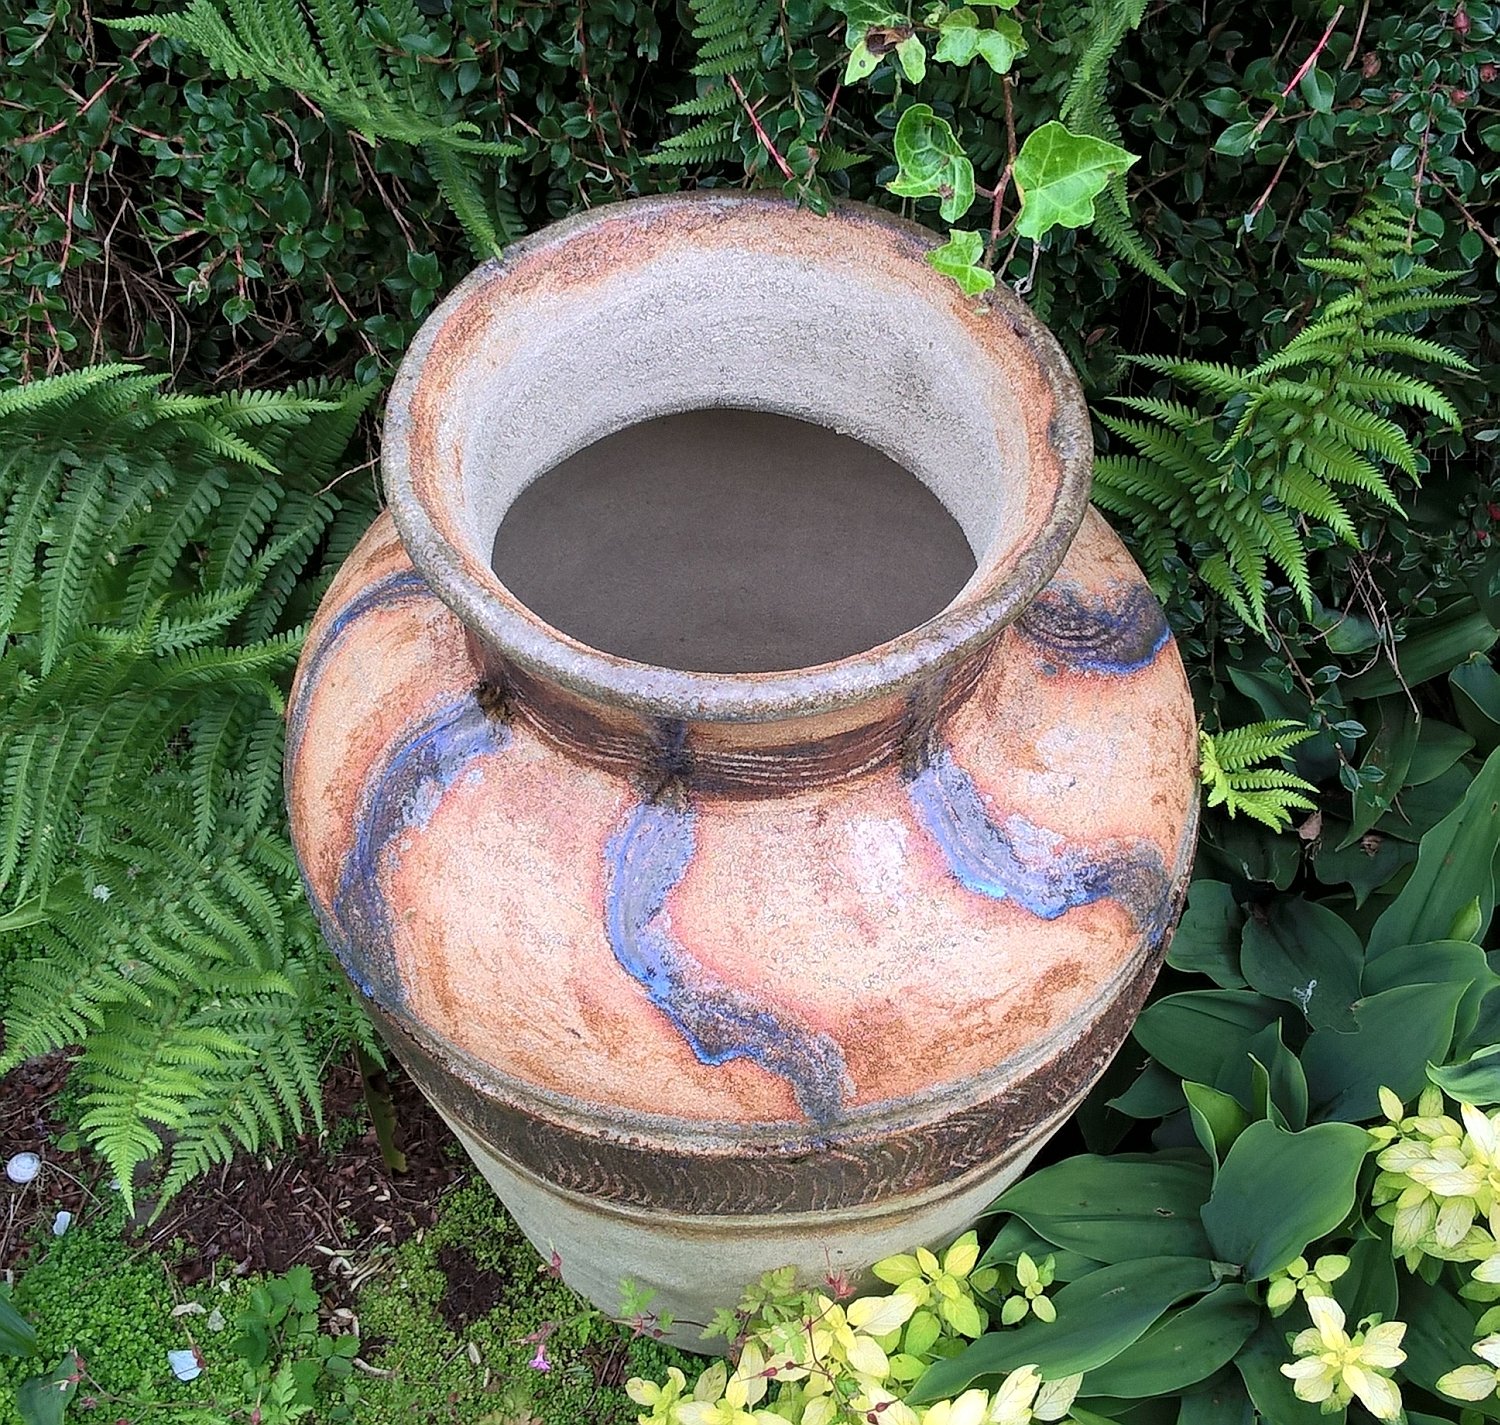 Garden pot inspired by St Anthony'well.